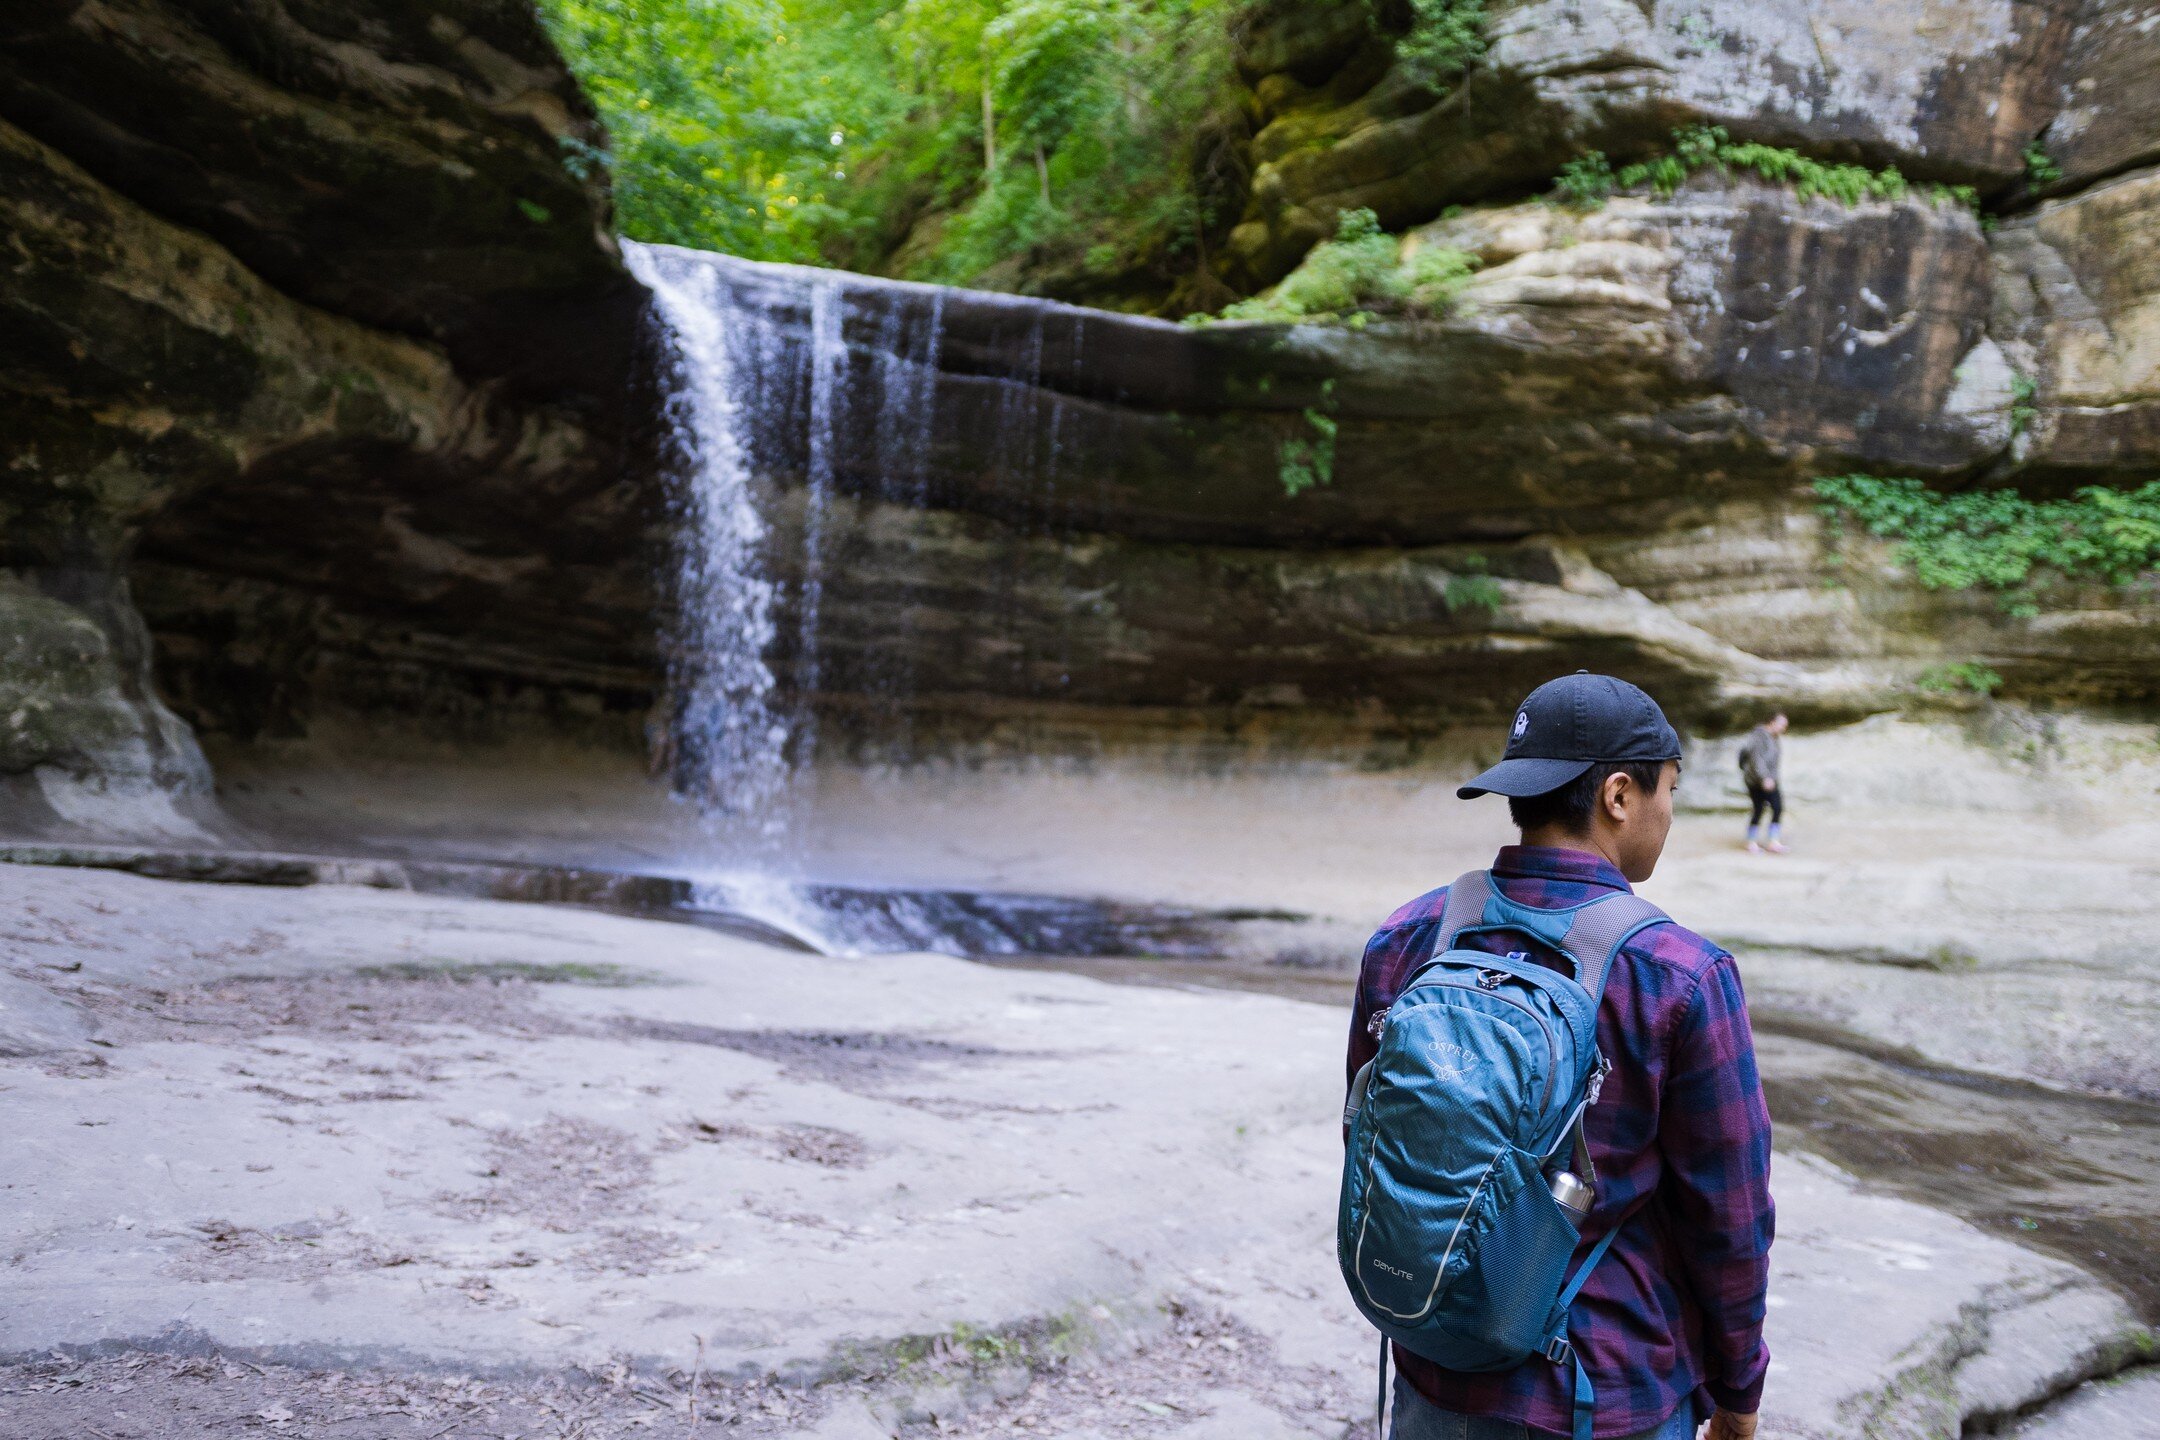 Excited to experience God's creation during the upcoming student overnight trip to Starved Rock this Friday! Reach out if you want to go but haven't signed up yet!

&quot;In his hand are the depths of the earth; the heights of the mountains are his a